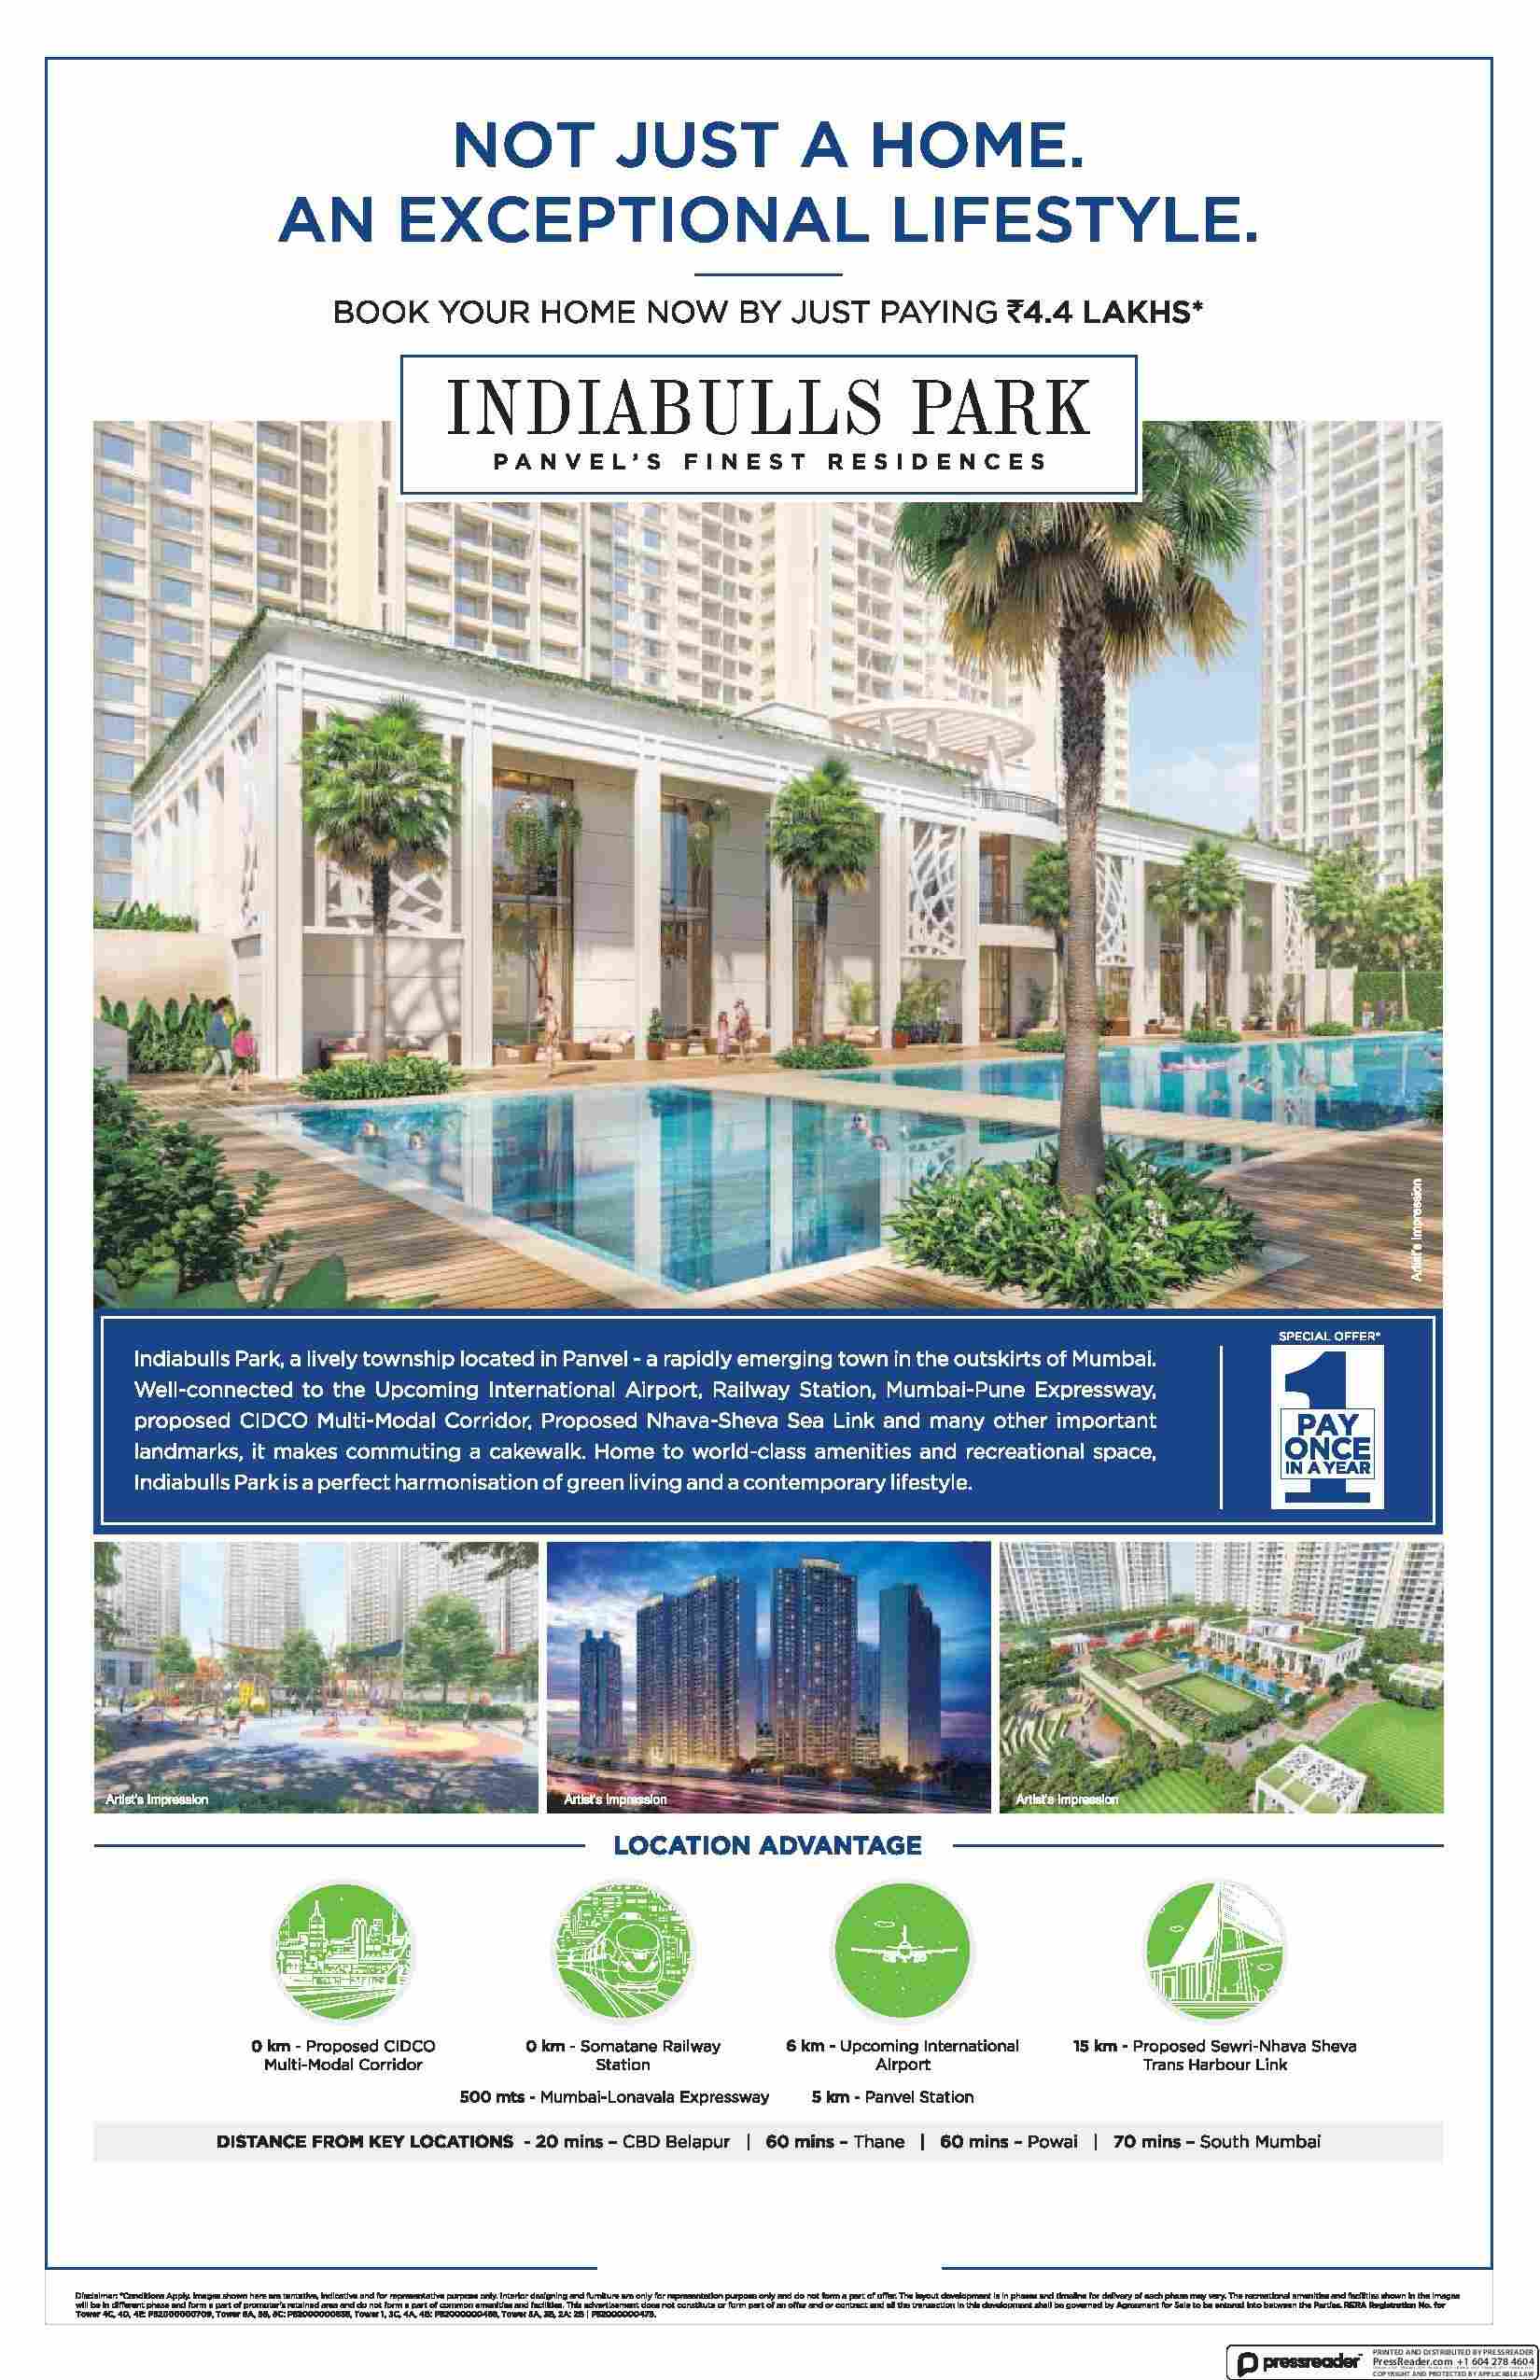 Book your home by just paying Rs 4.4 Lakhs at Indiabulls Park in Panvel, Mumbai Update